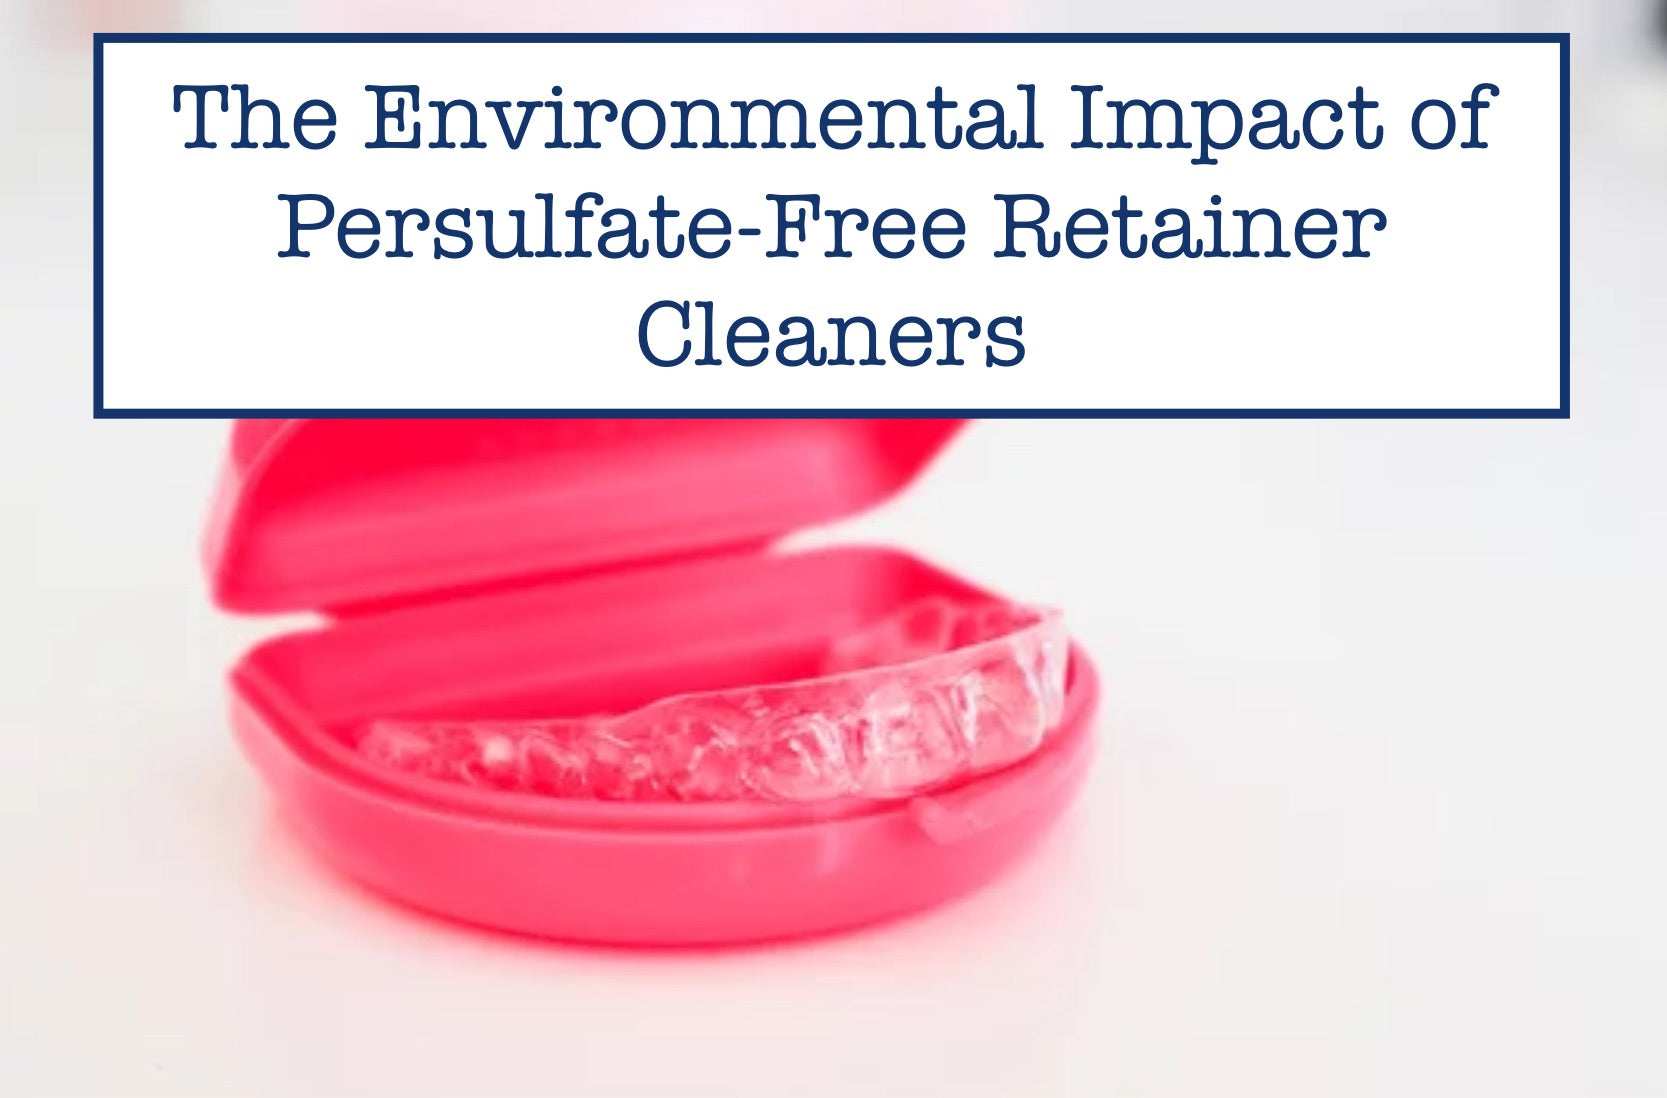 The Environmental Impact of Persulfate-Free Retainer Cleaners